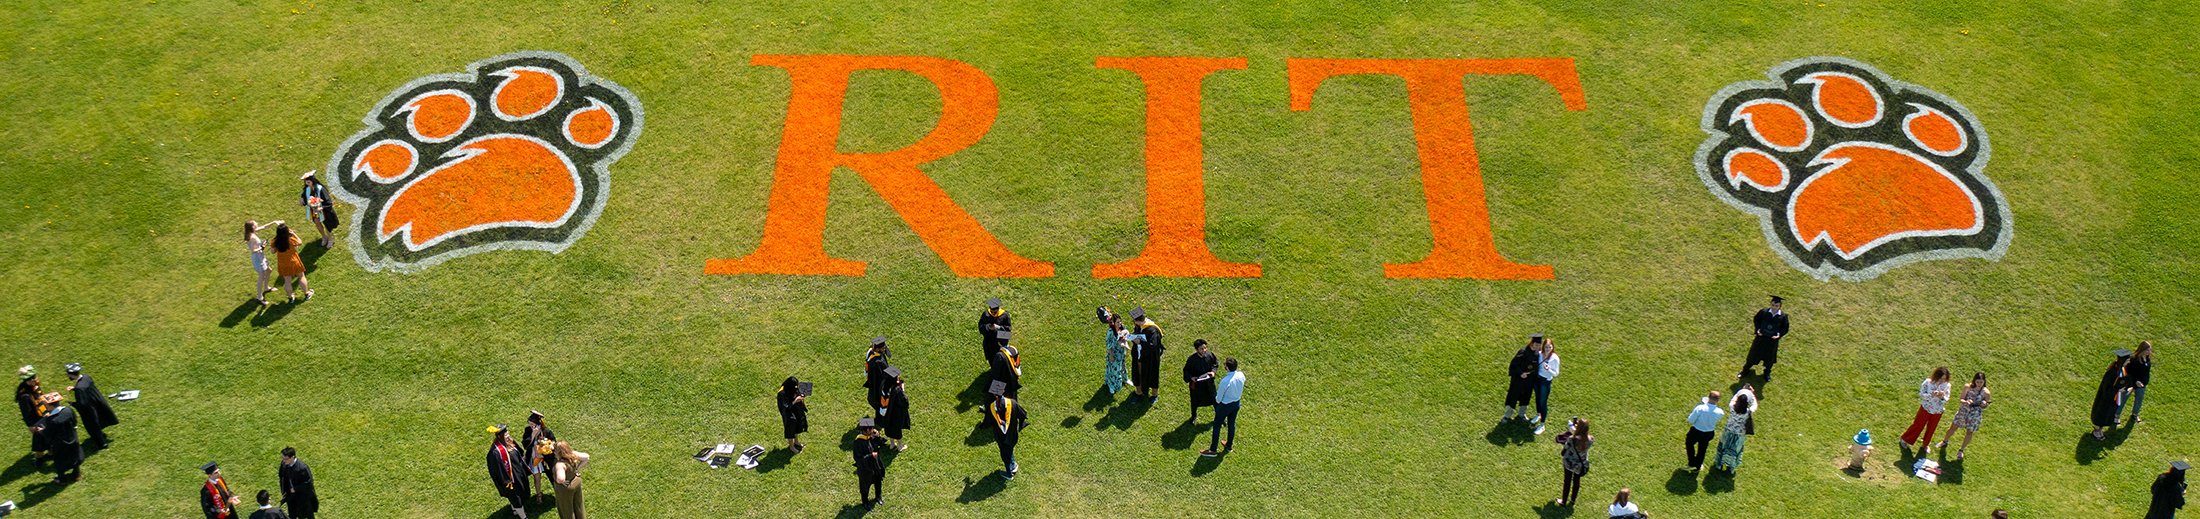 An overhead view of the RIT logo on a patch of grass during commencement ceremonies.